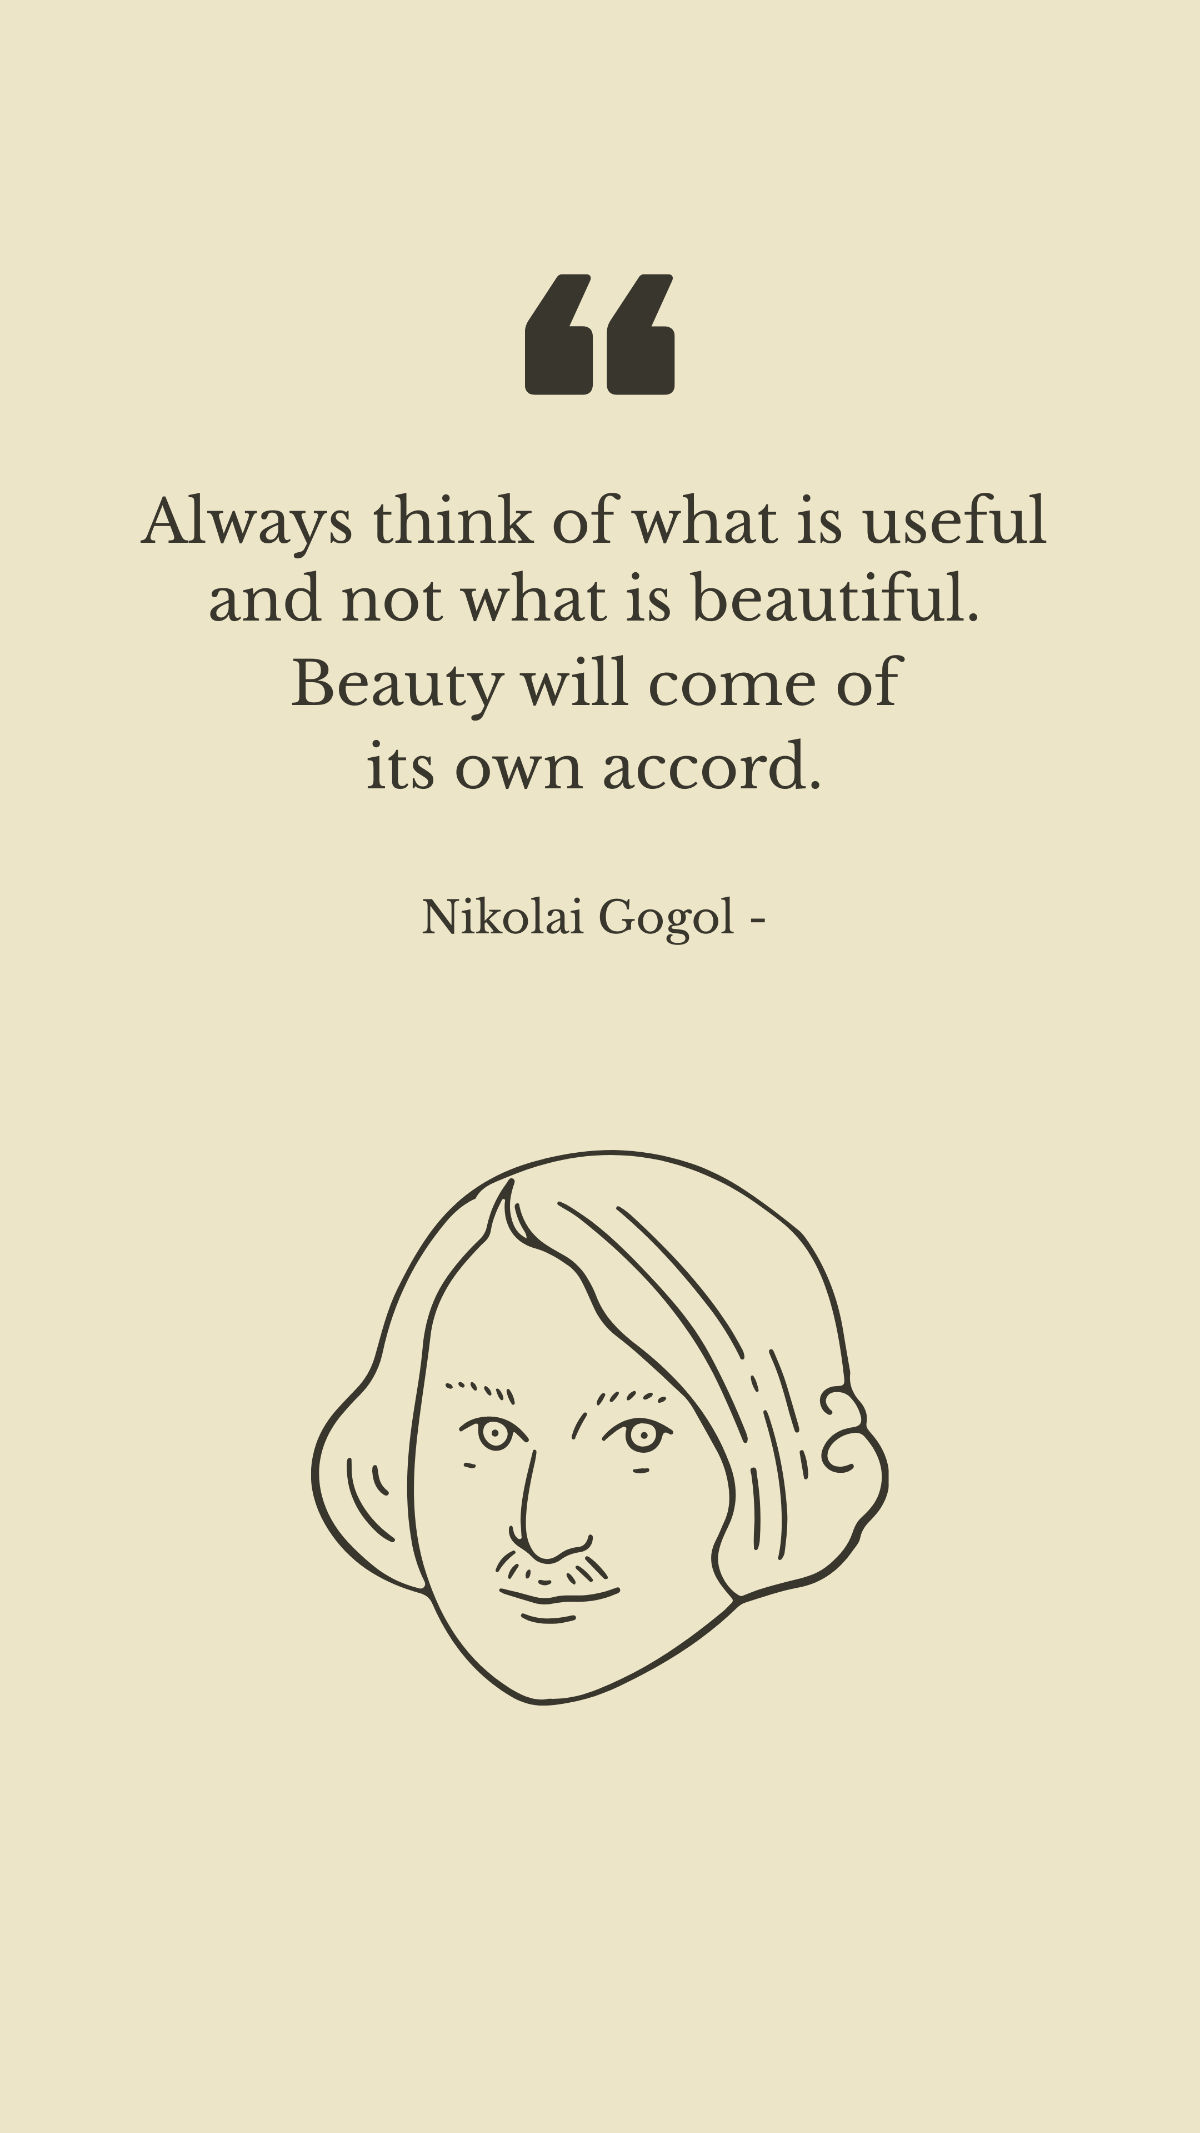 Nikolai Gogol - Always think of what is useful and not what is beautiful. Beauty will come of its own accord.